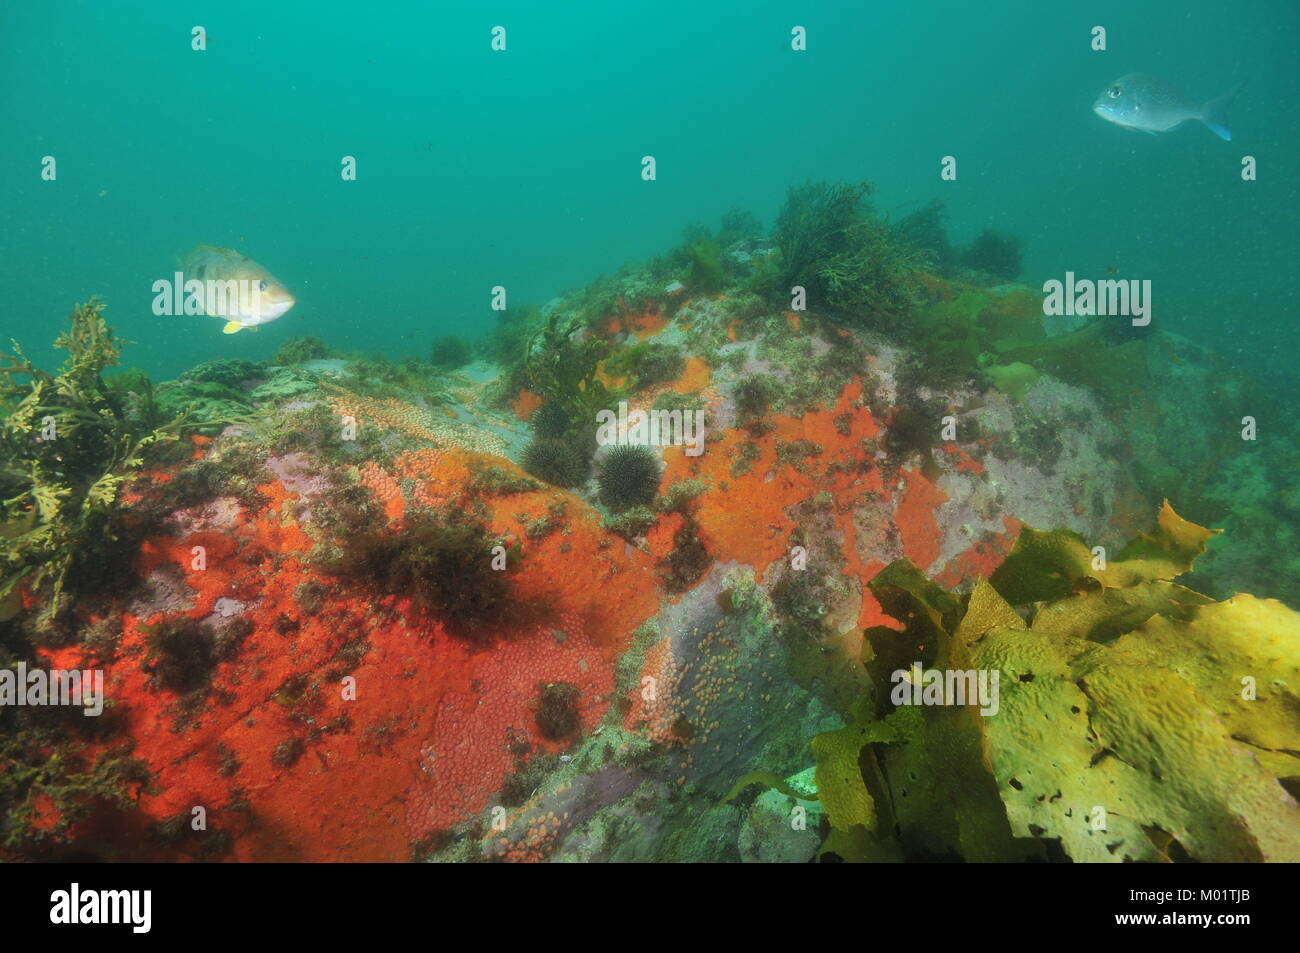 Boulder covered with colorful encrusting sponges and tunicates with spotty wrasse and young snapper swimming about it in murky water. Stock Photo